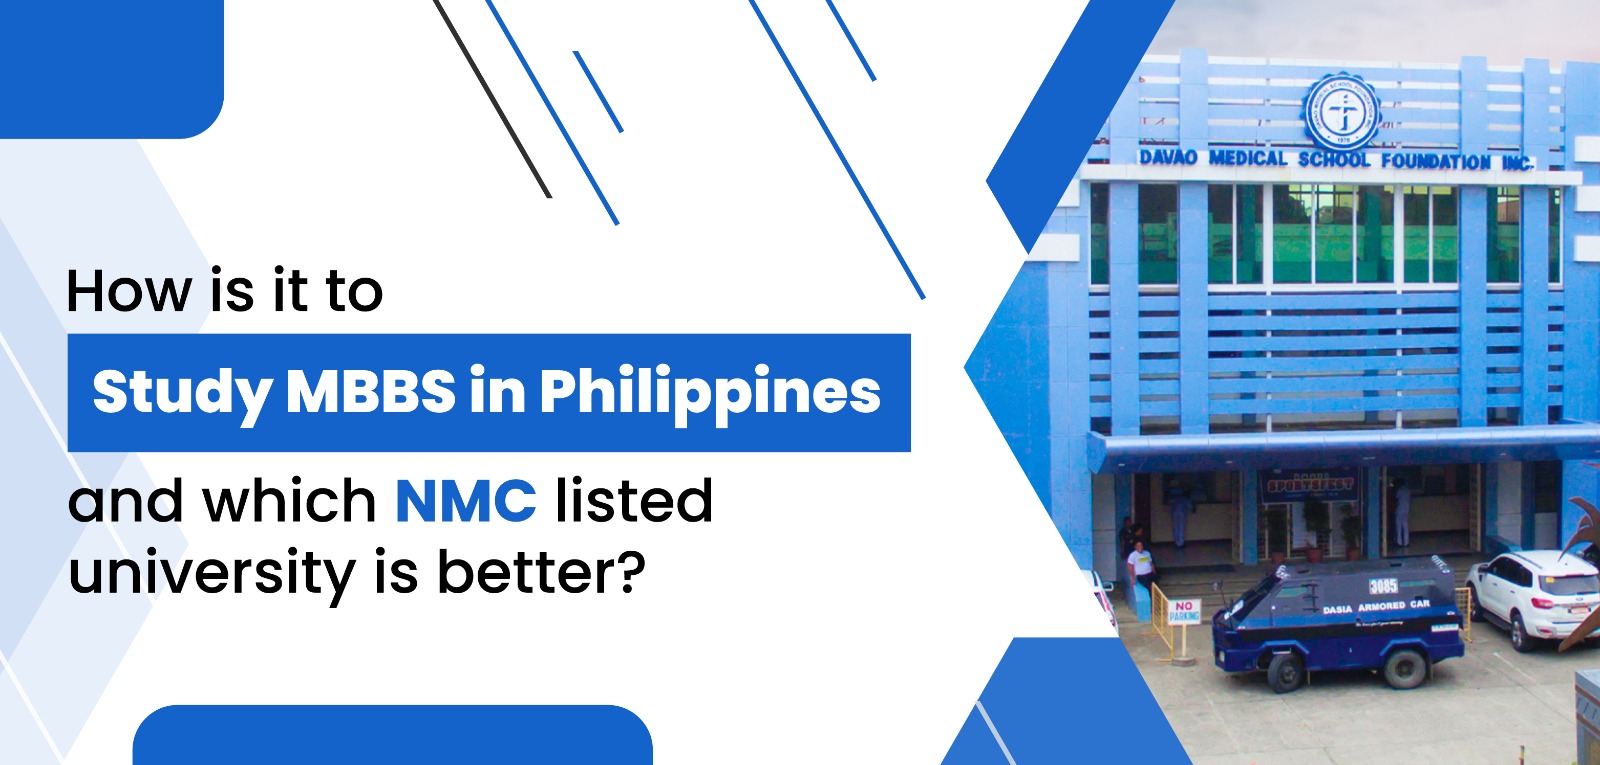 How is it to study MBBS in Philippines and which NMC listed university is better